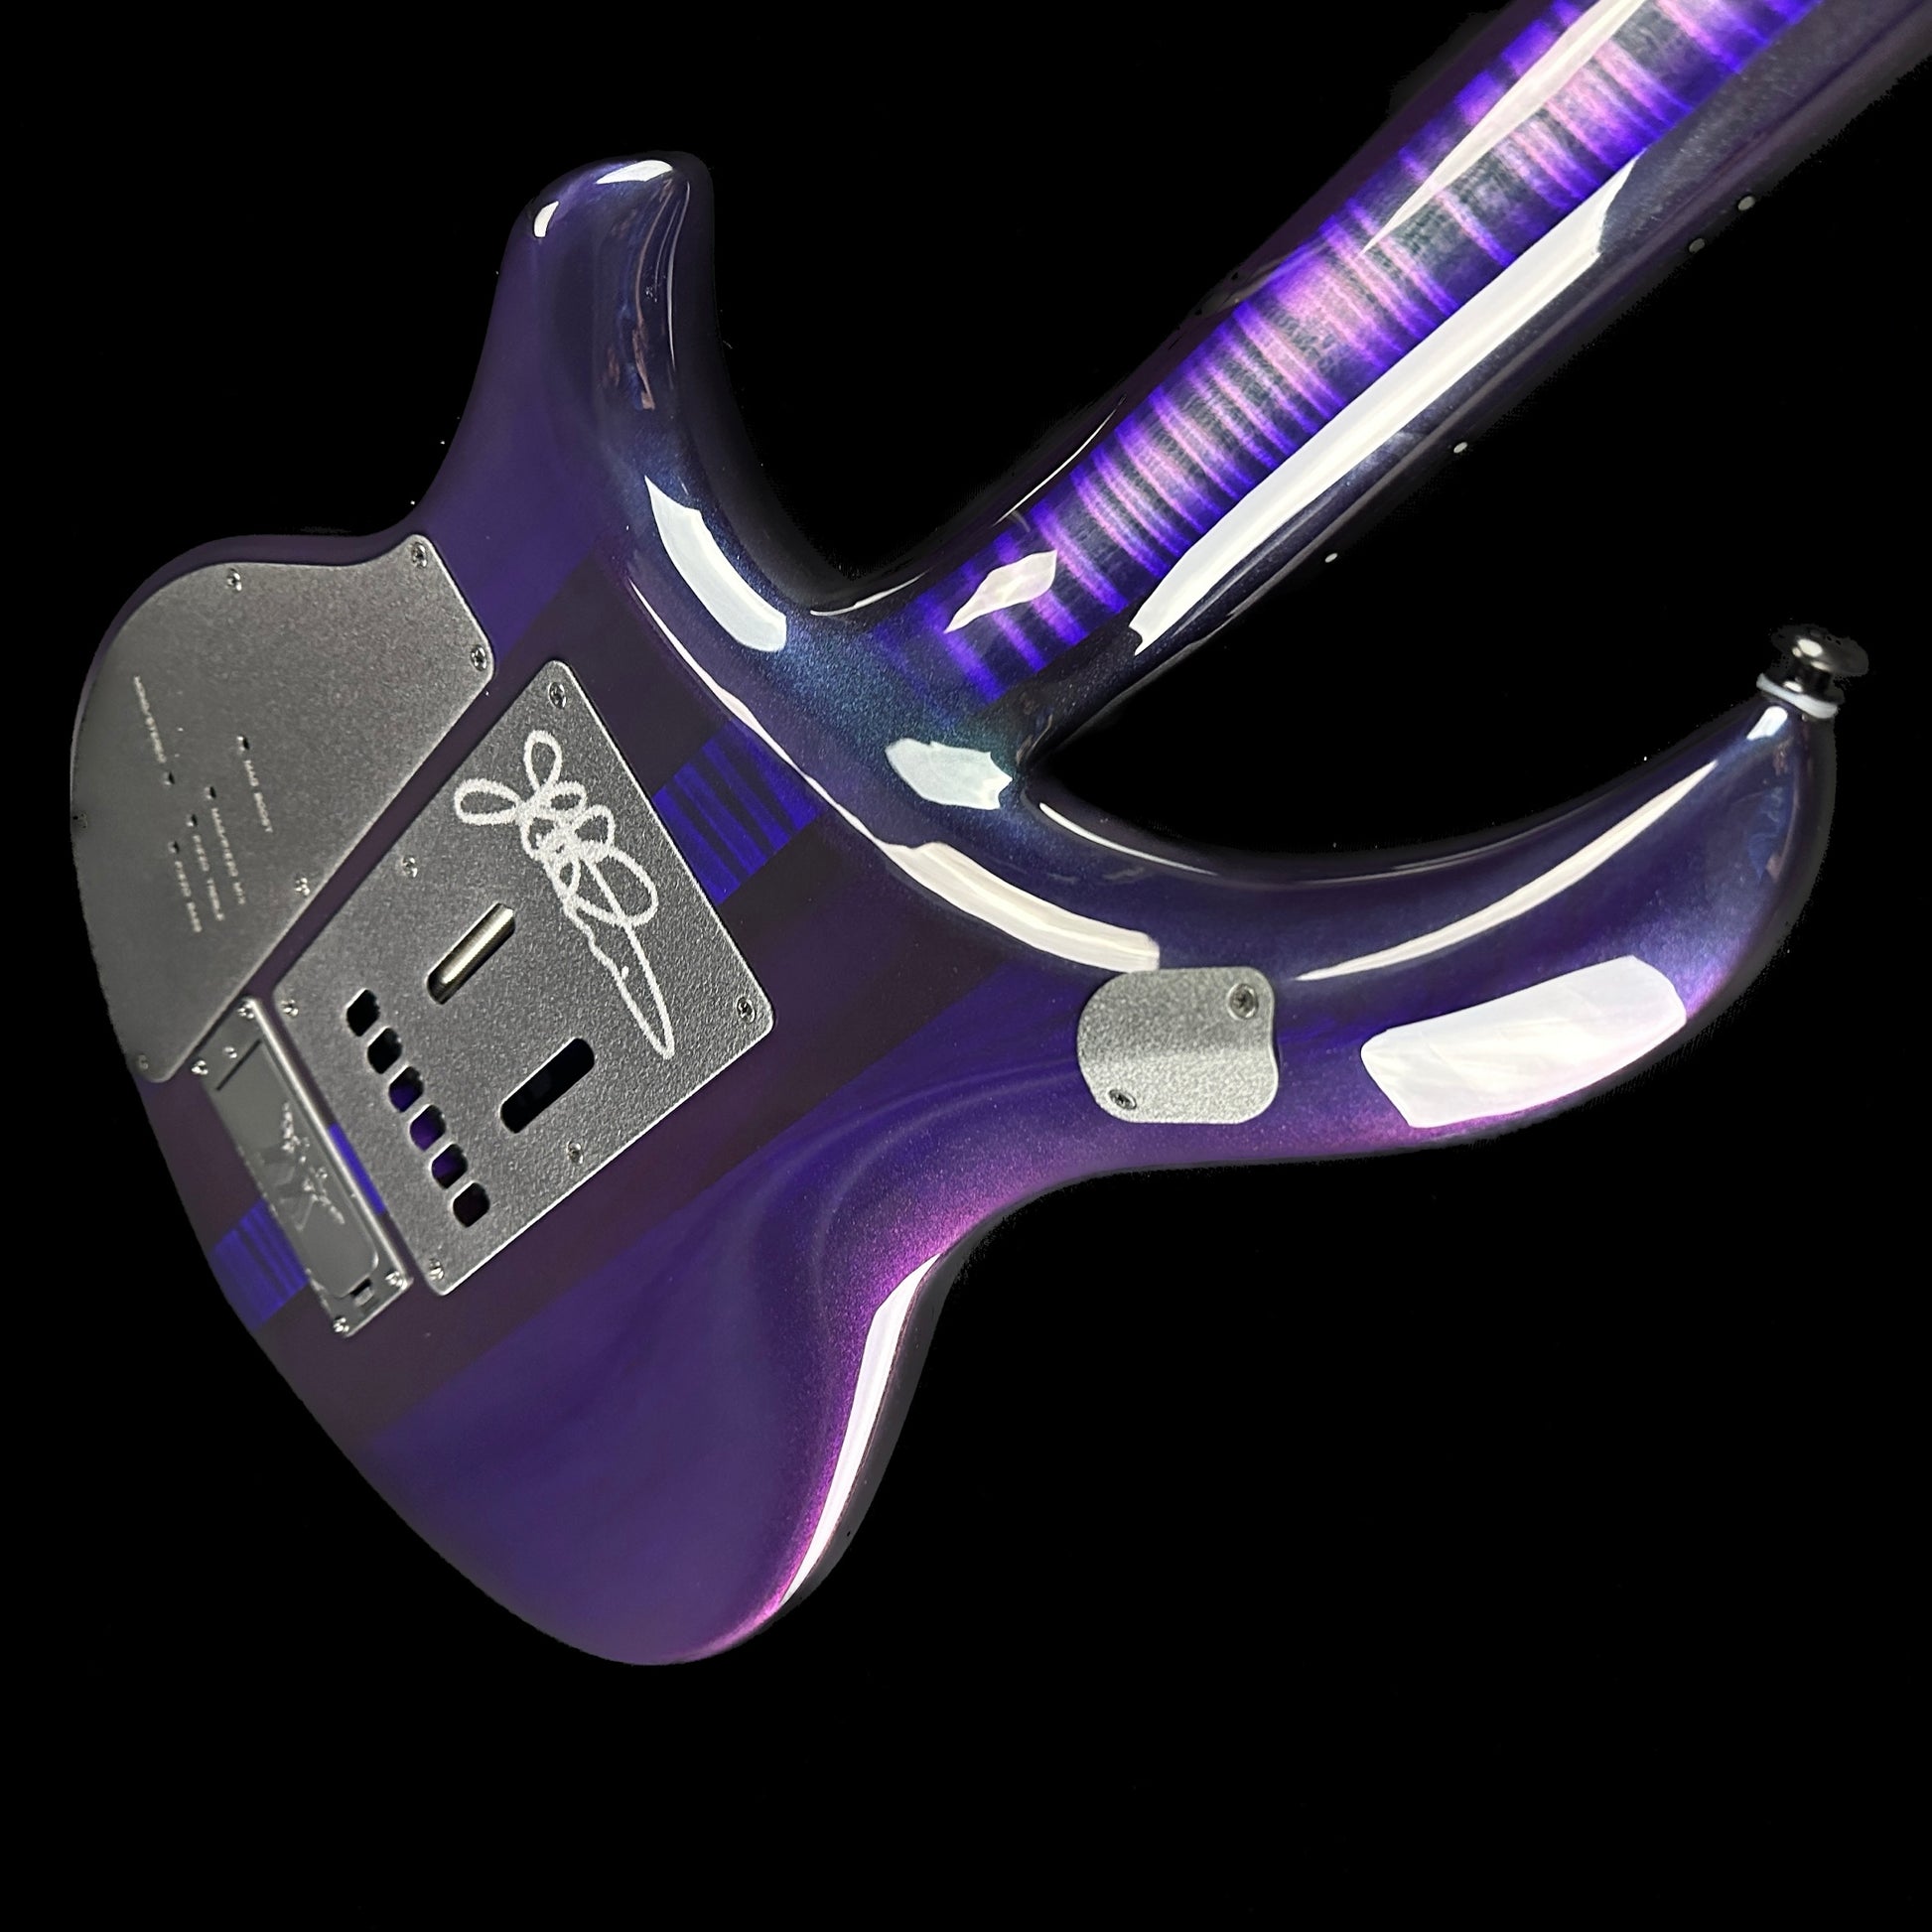 Back angle of Ernie Ball MusicMan Majesty 6 Limited Crystal Amethyst.